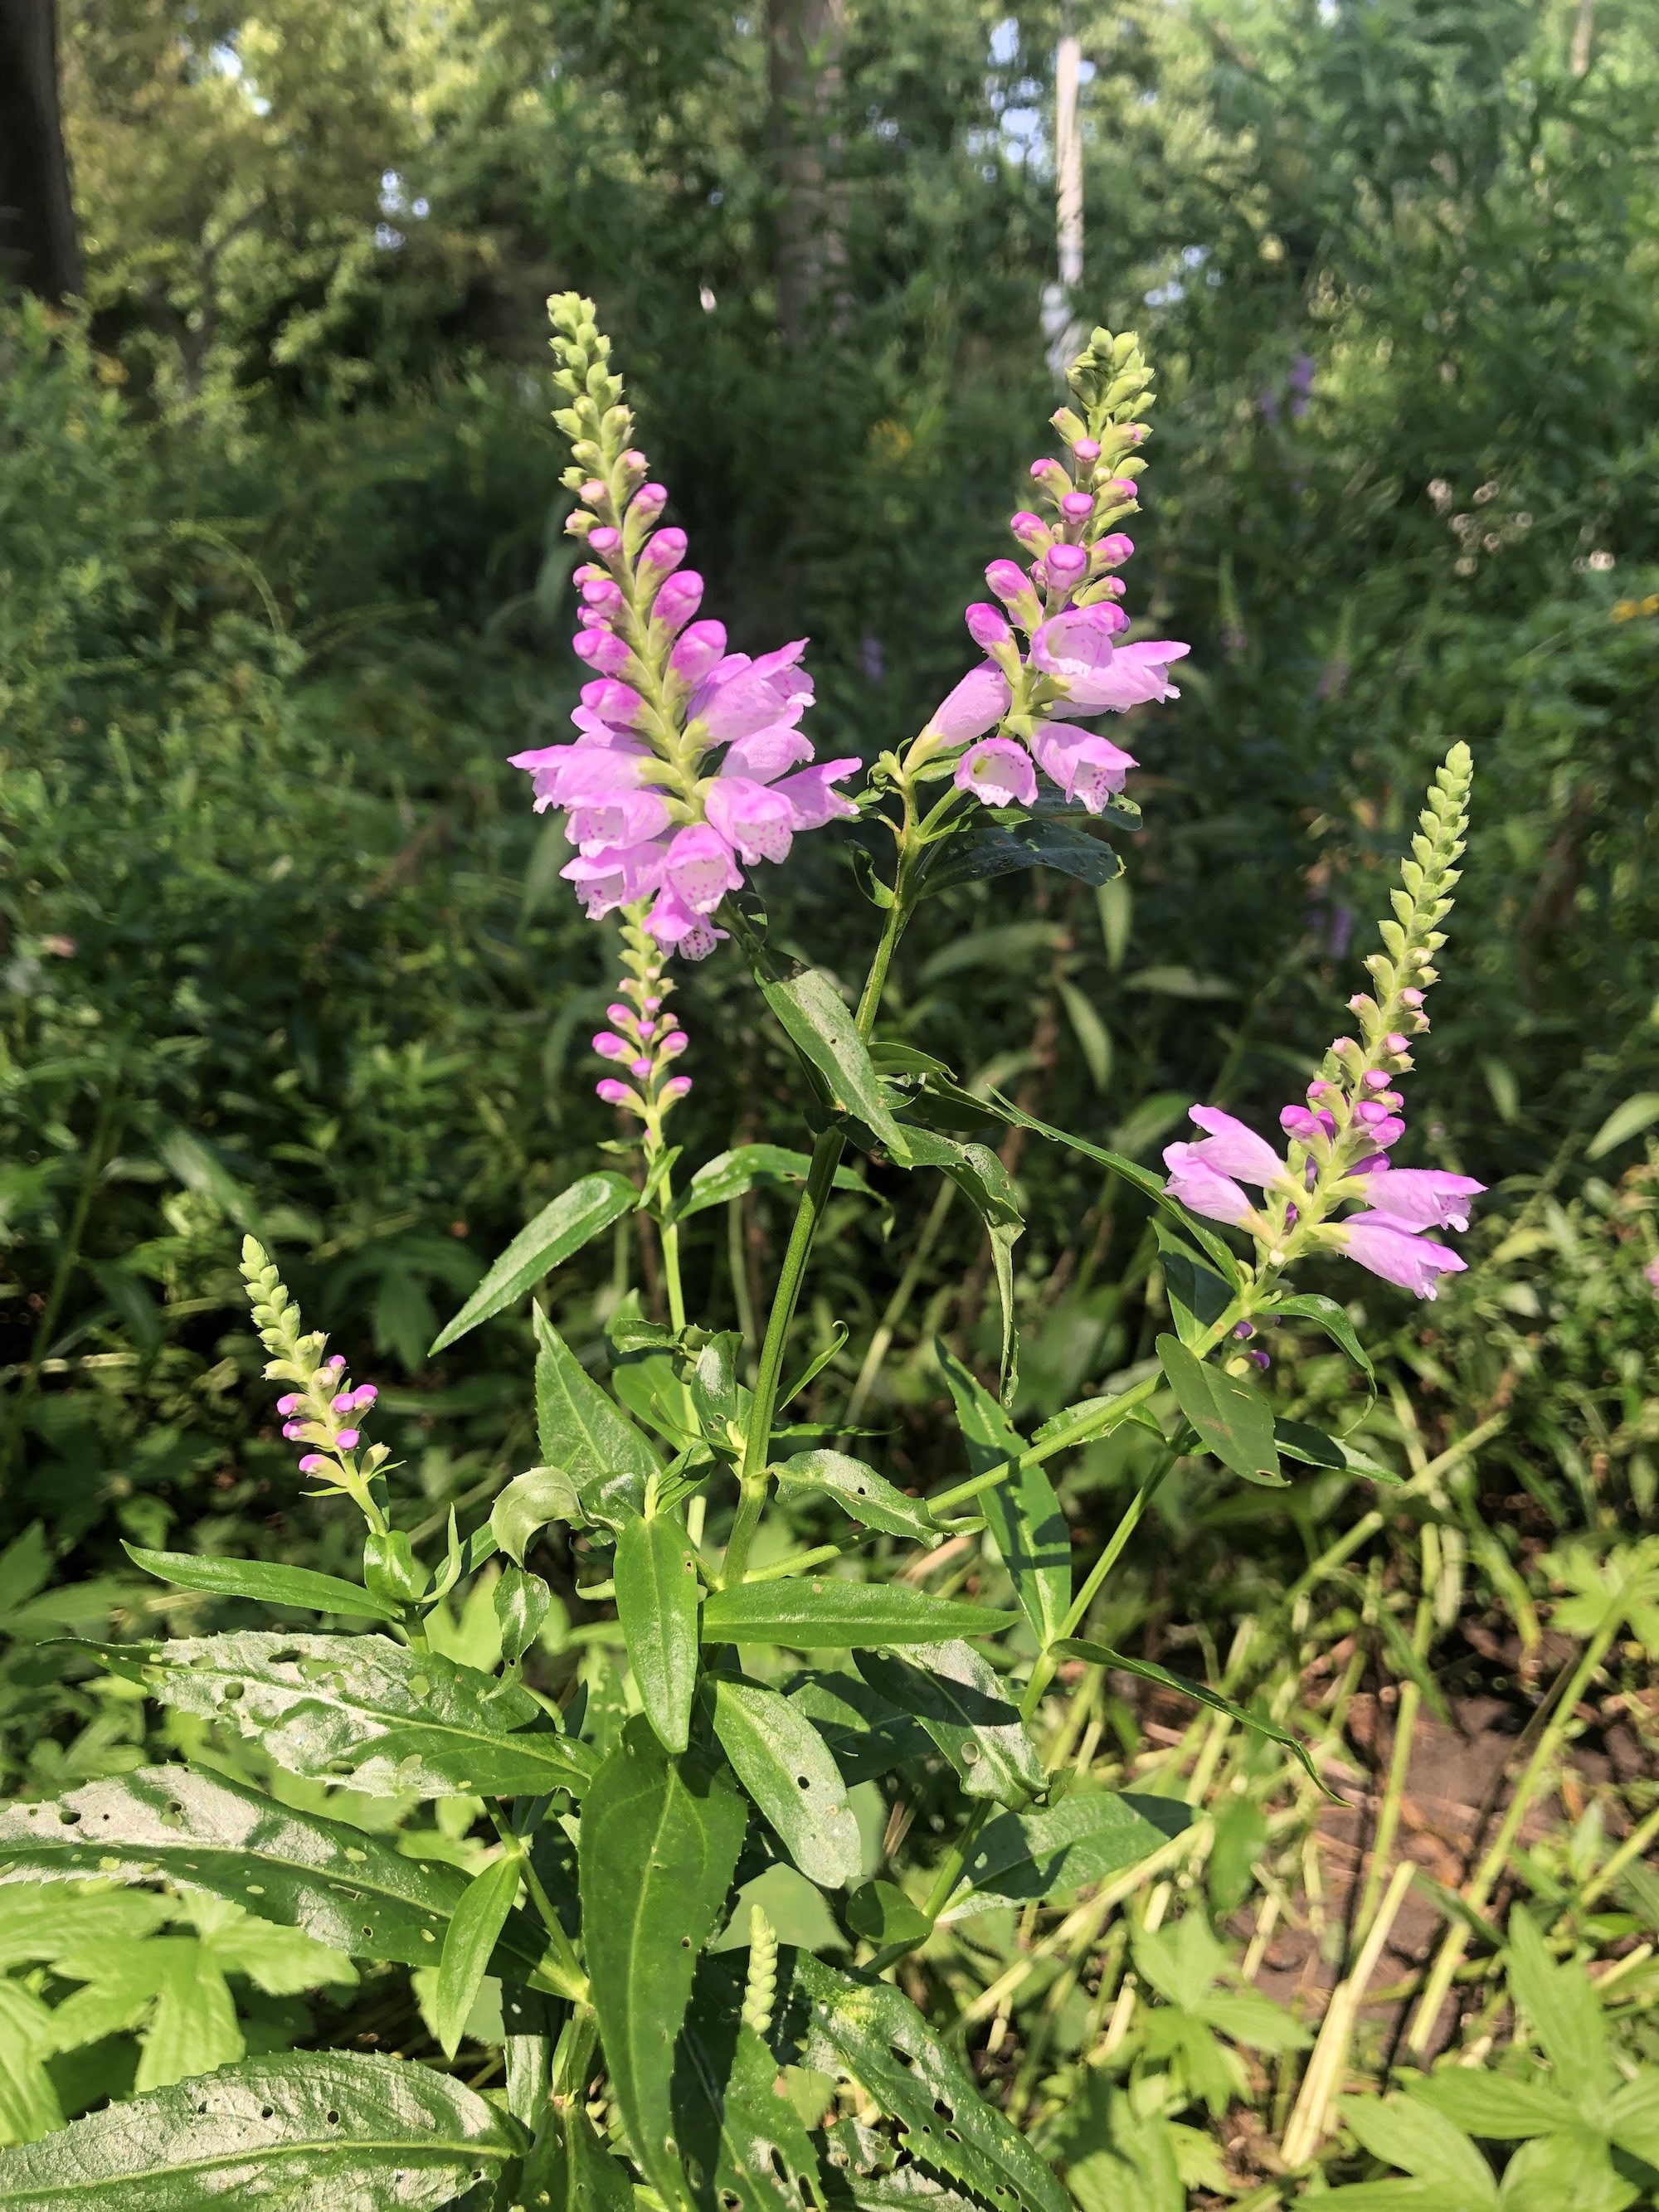 Obedient Plant in Thoreau Rain Garden in Madison, Wisconsin on July 31, 2021.